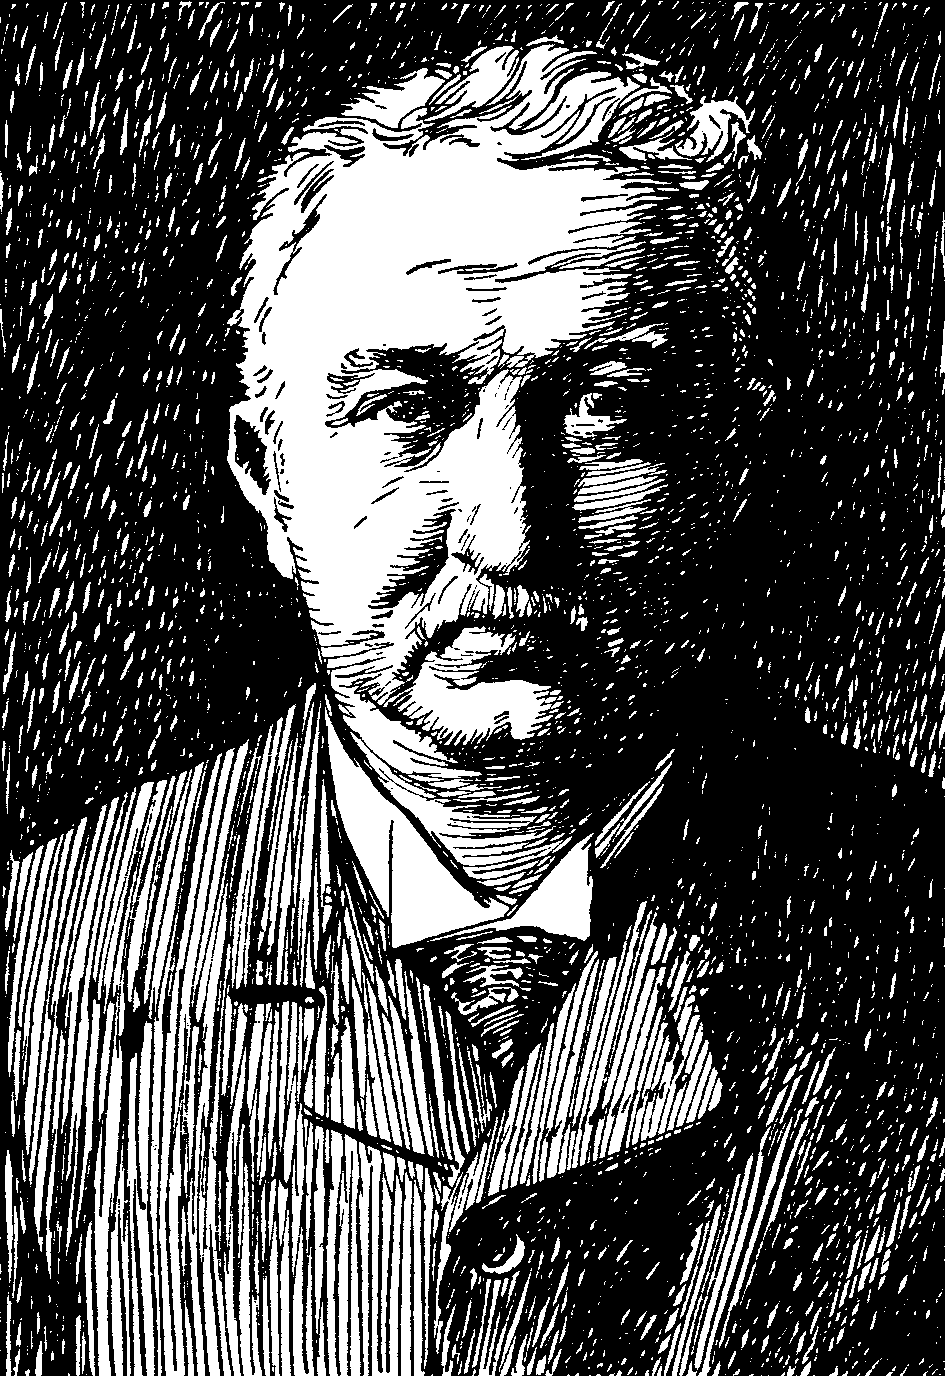 [Frontispiece] from Cecil Rhodes by Ian D. Colvin